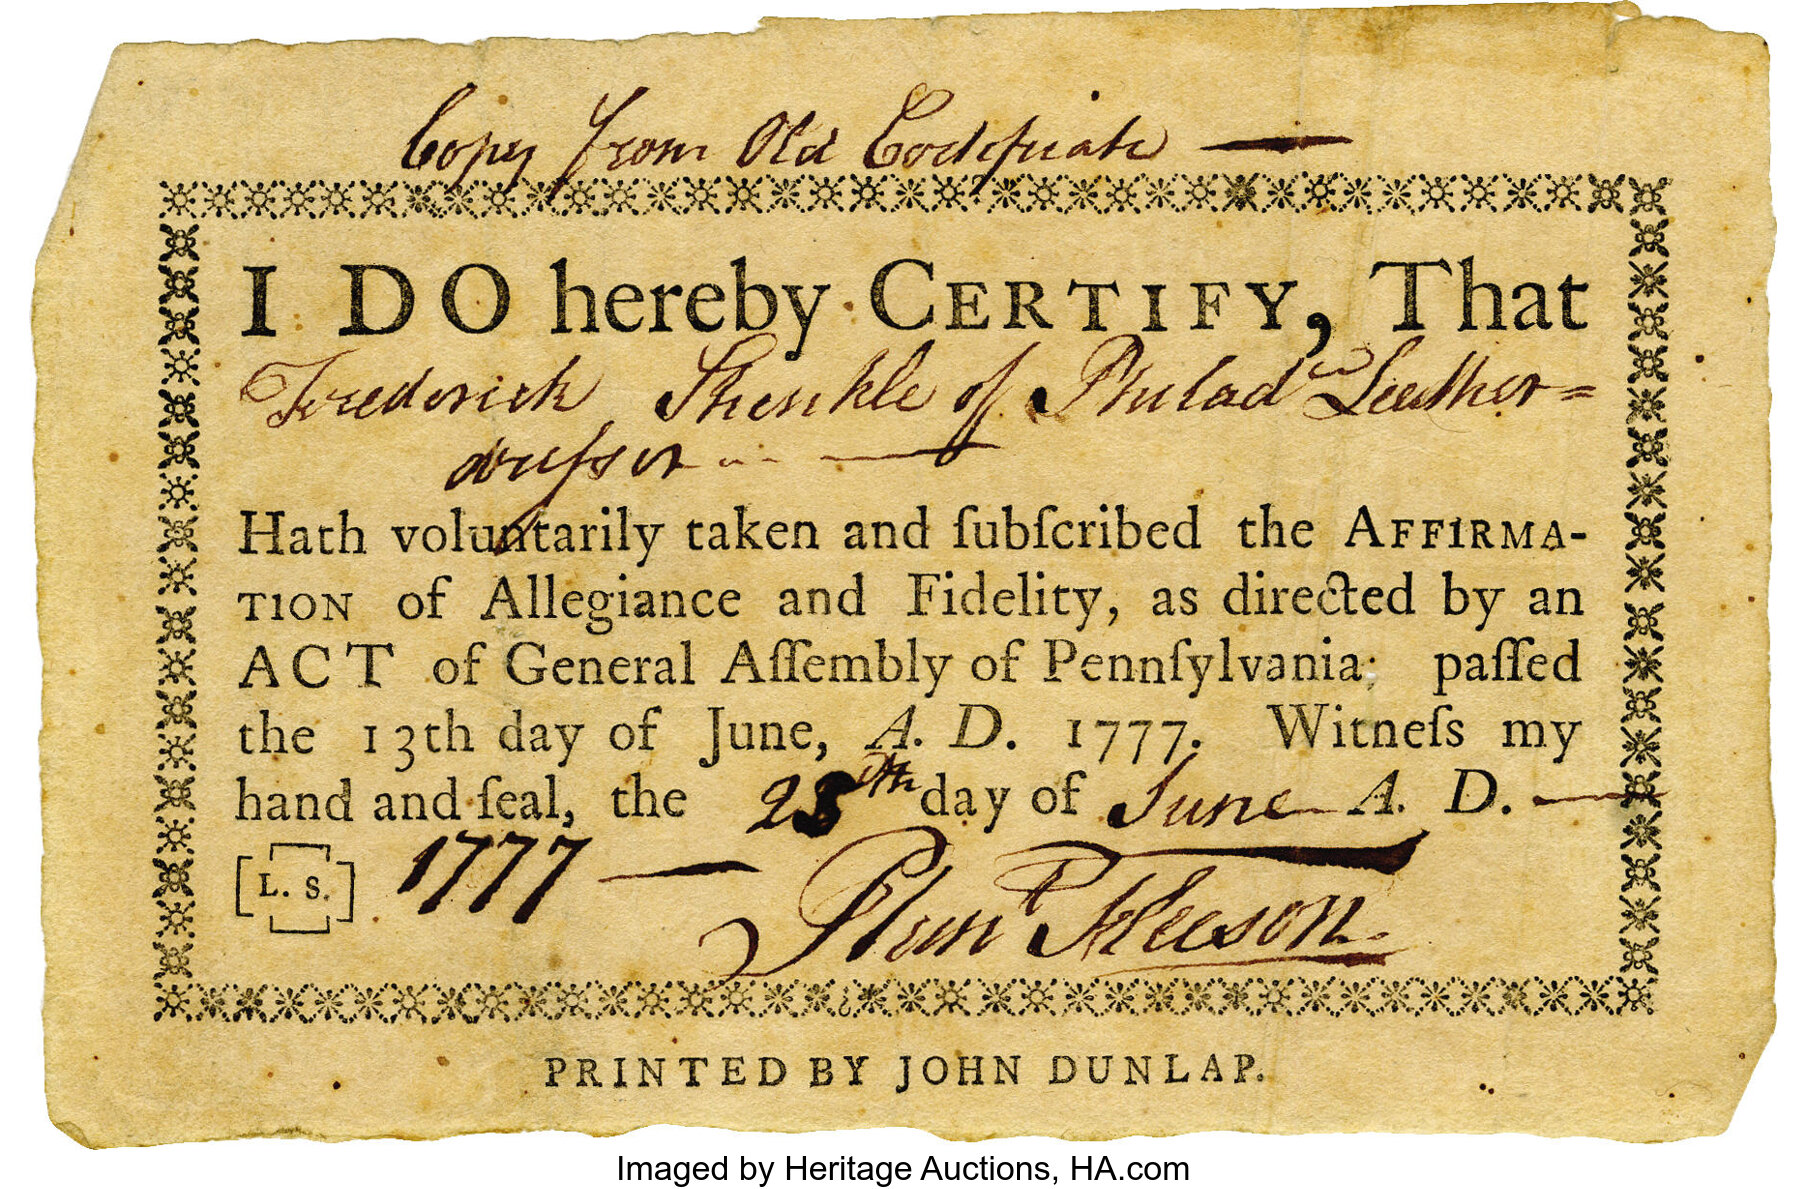 Revolutionary War Loyalty Oath Printed By John Dunlap Military Lot 56046 Heritage Auctions 